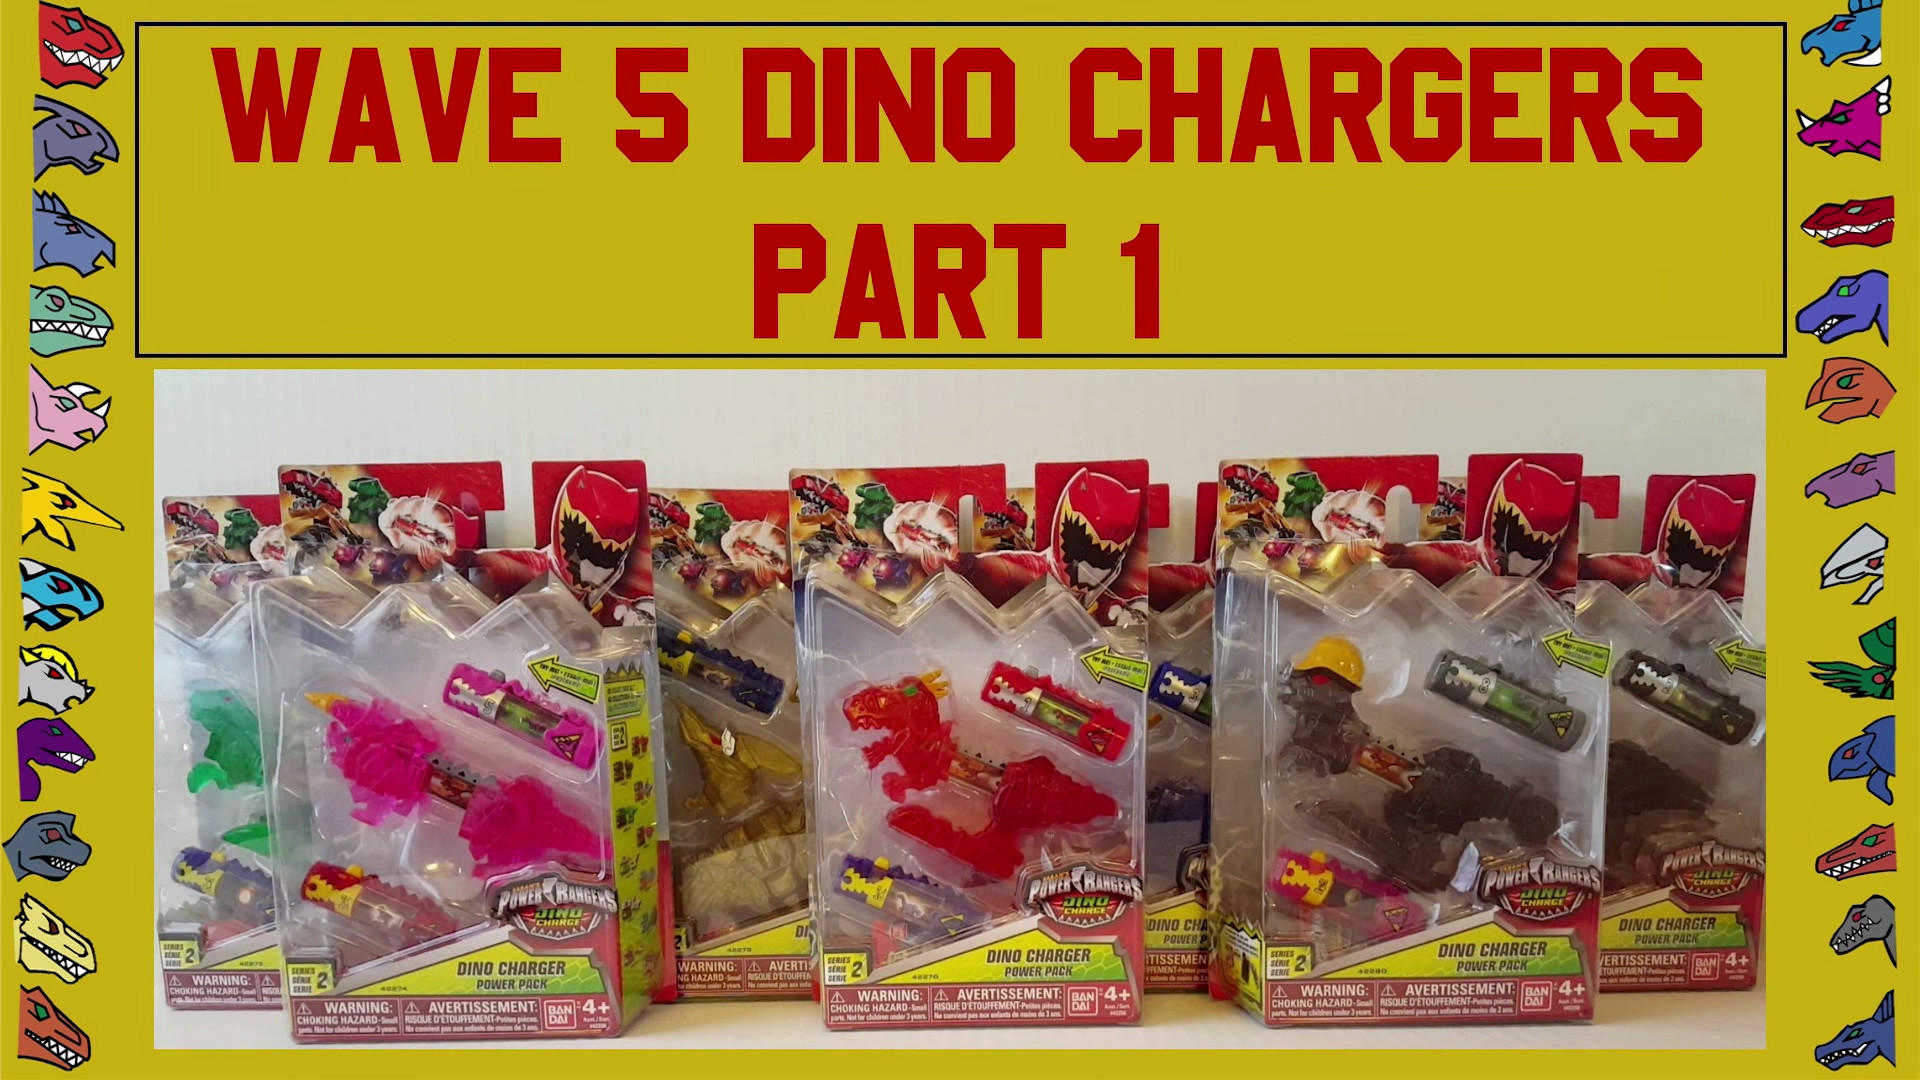 1920x1080 download. The gimmick for Power Rangers Dino Charge ...